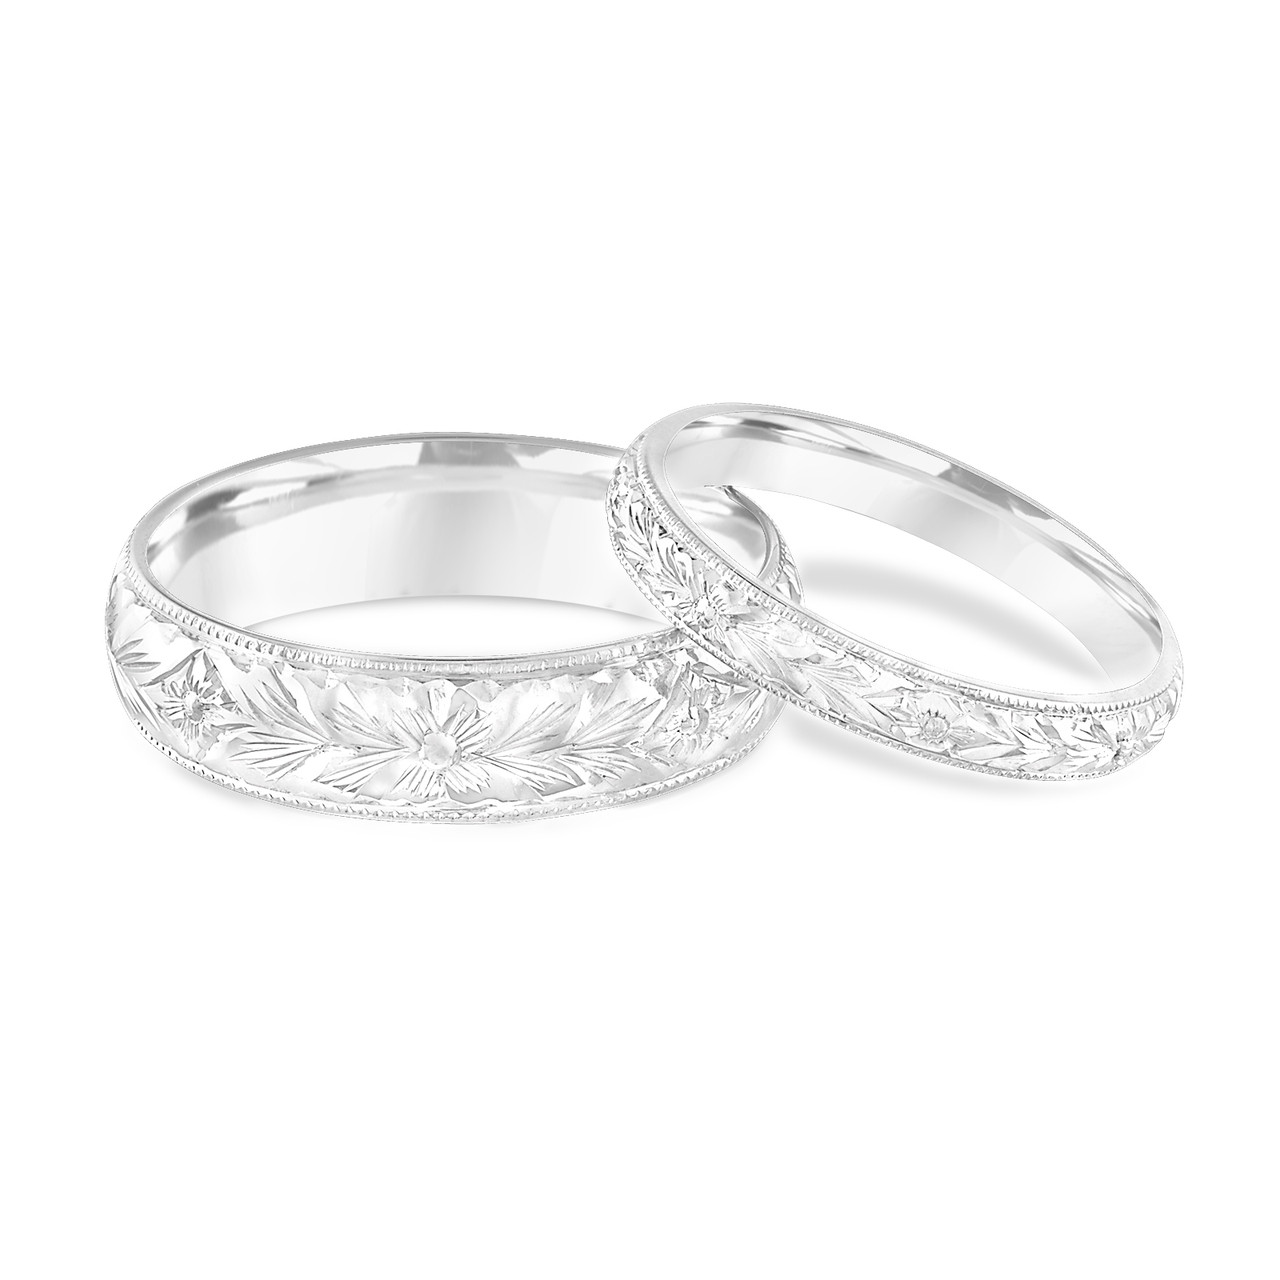 His and Hers Wedding Bands, Hand Engraved Matching Wedding